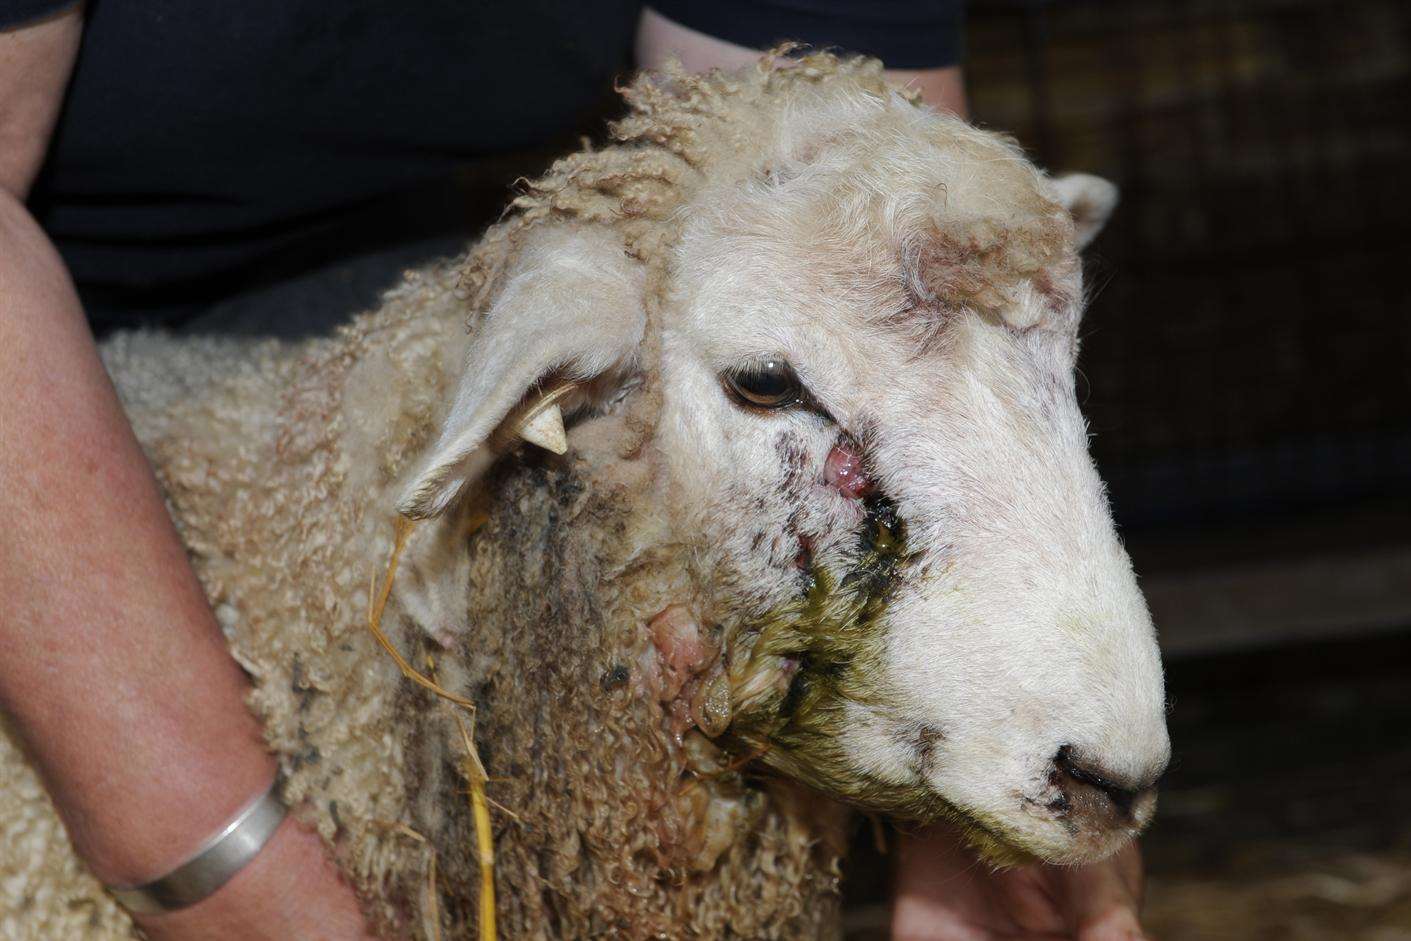 A sheep was injured at Snoad Farm in Otterden